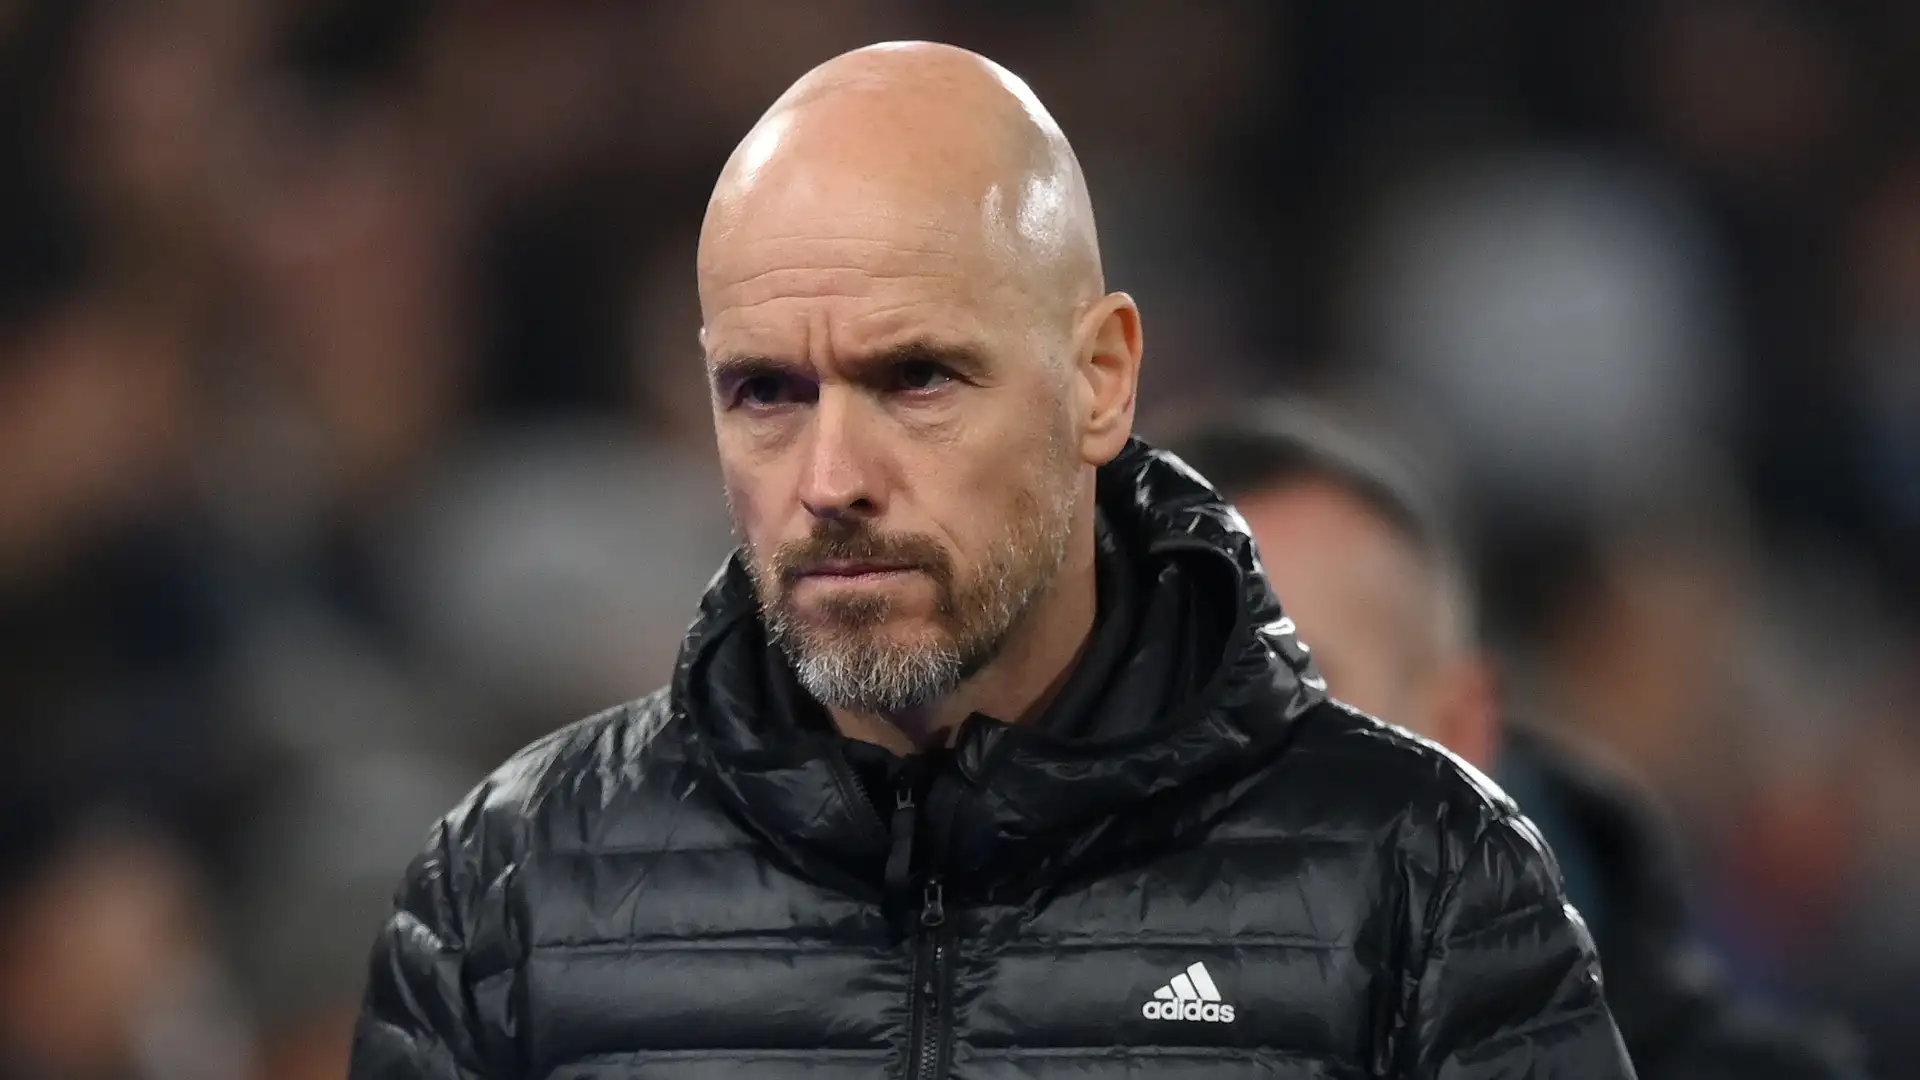 Erik ten Hag told his main ‘mistake’ at Man Utd as Marco van Basten gives surprising opinion on under-fire manager’s future amid mounting sack talk